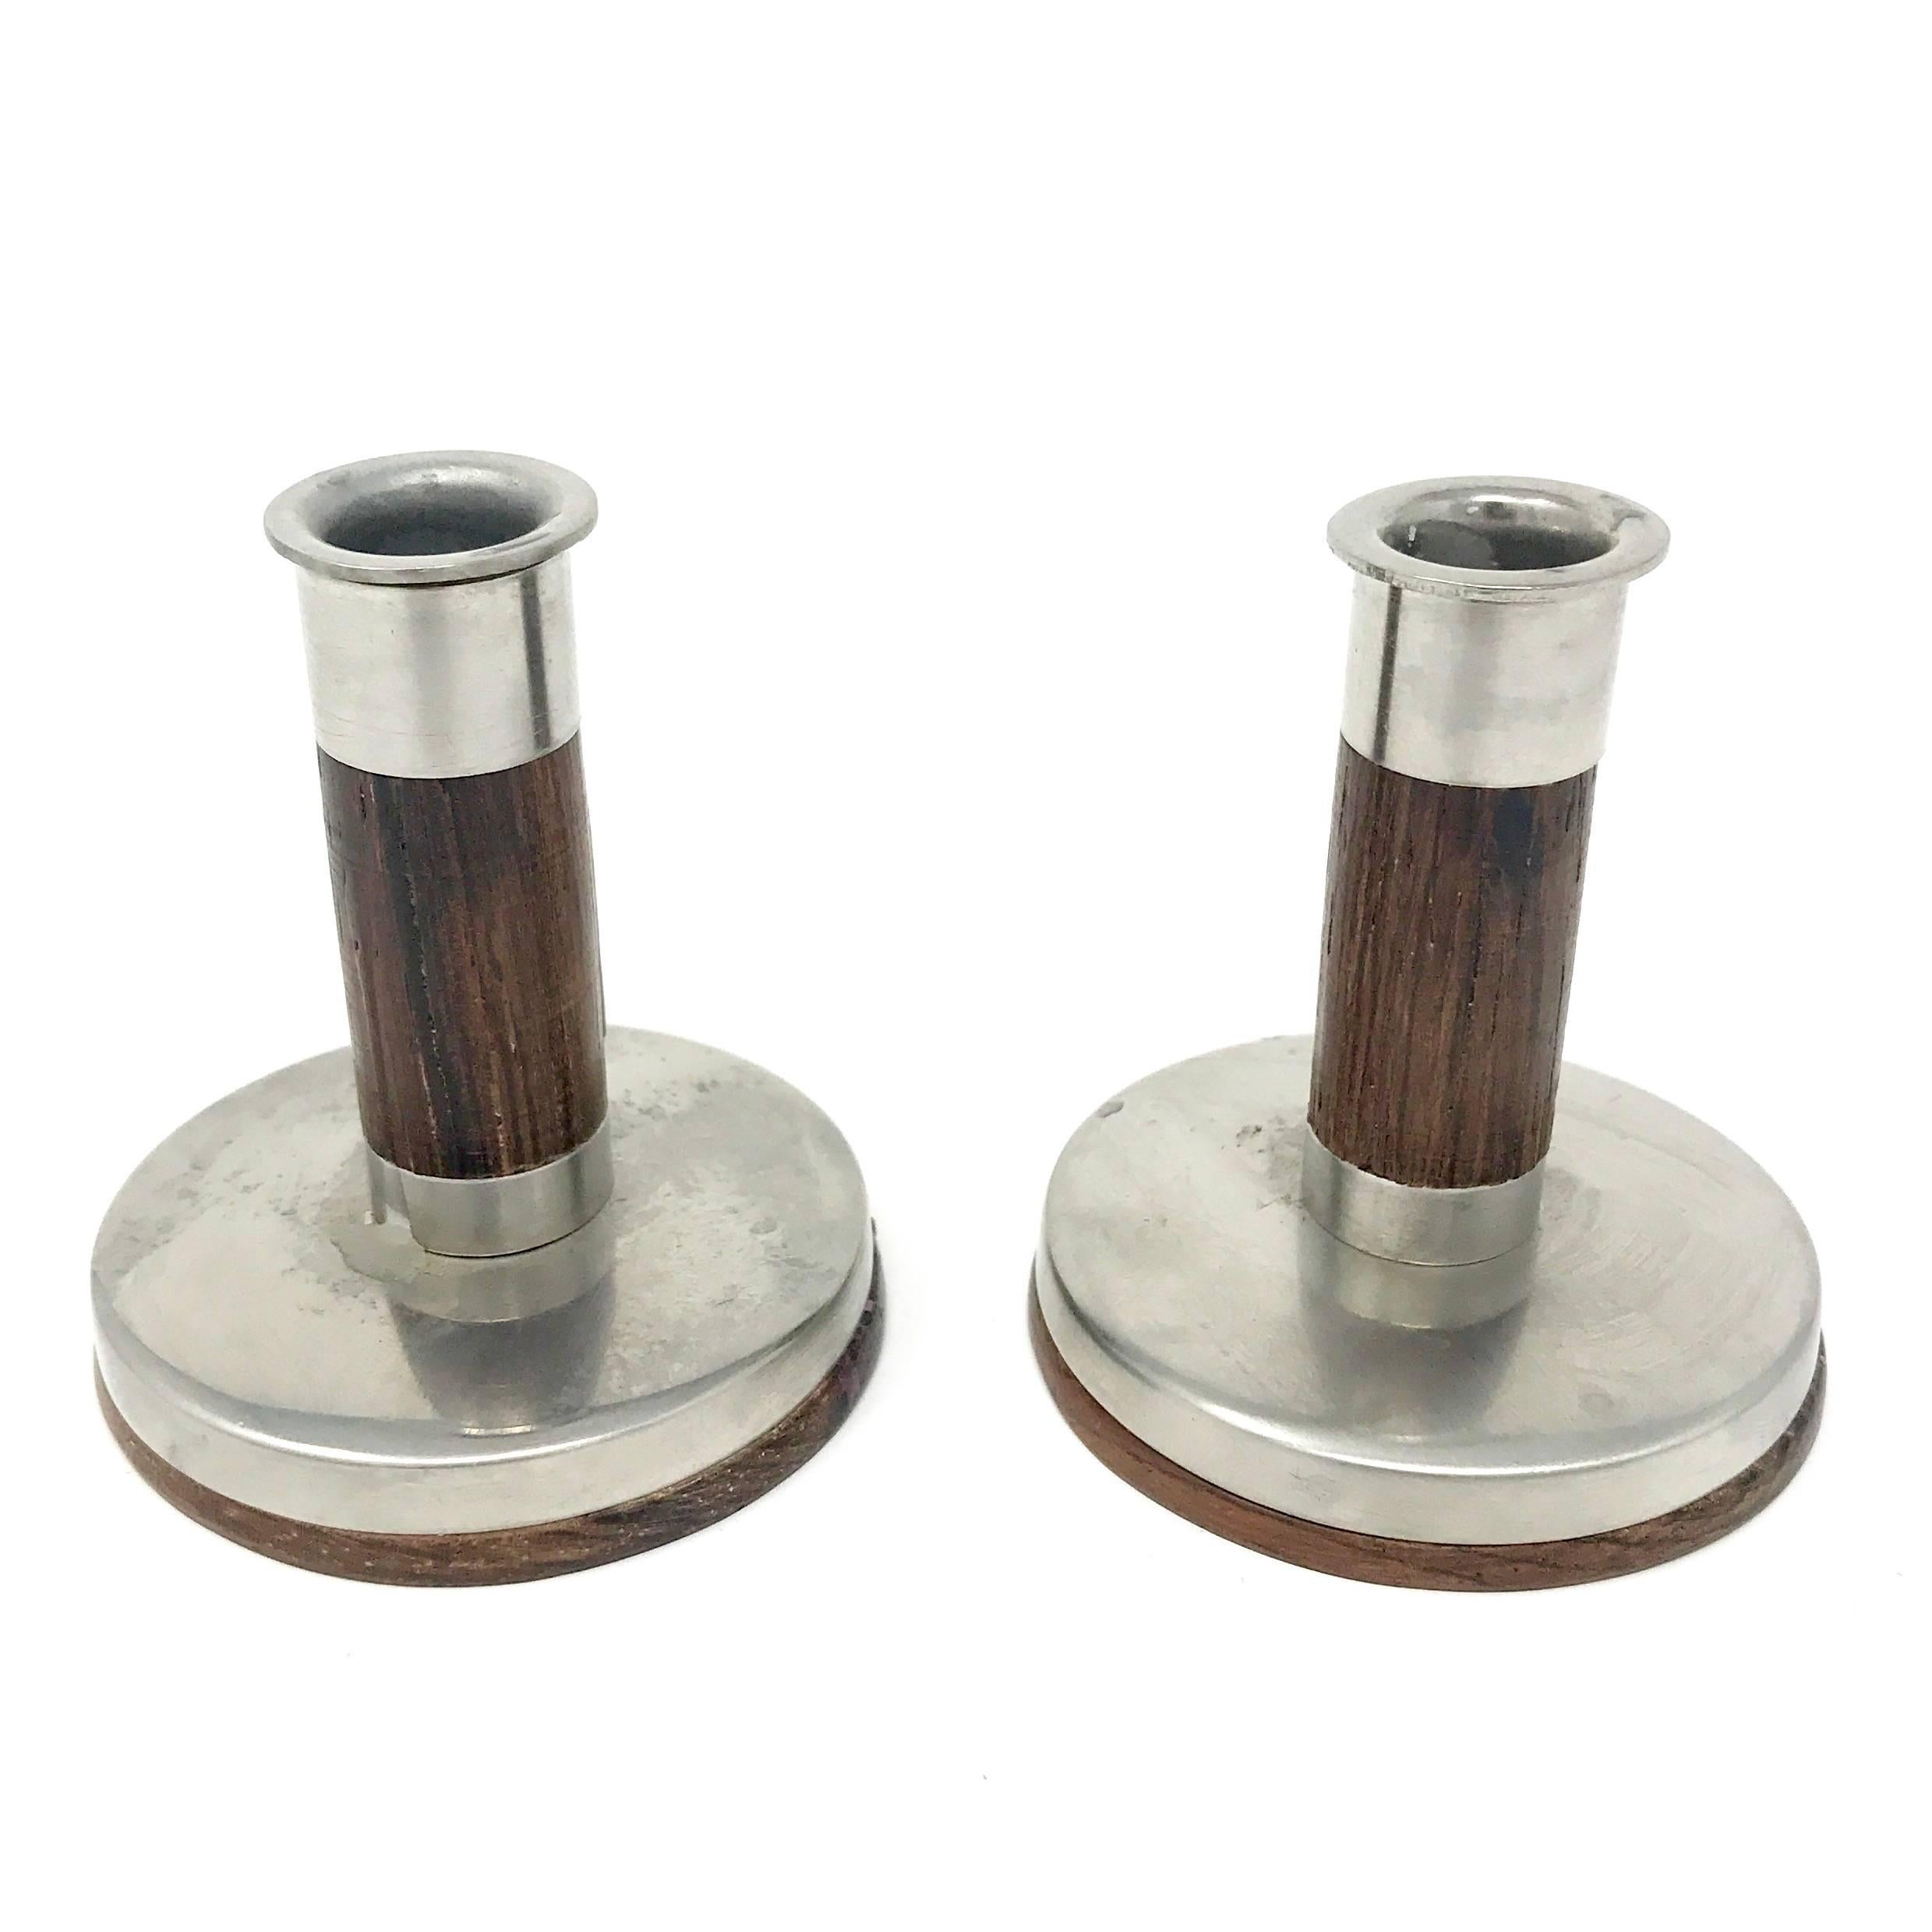 Pair of Danish Modern Rosewood and Stainless Steel Candlesticks by Lundtofte In Excellent Condition For Sale In Sacramento, CA